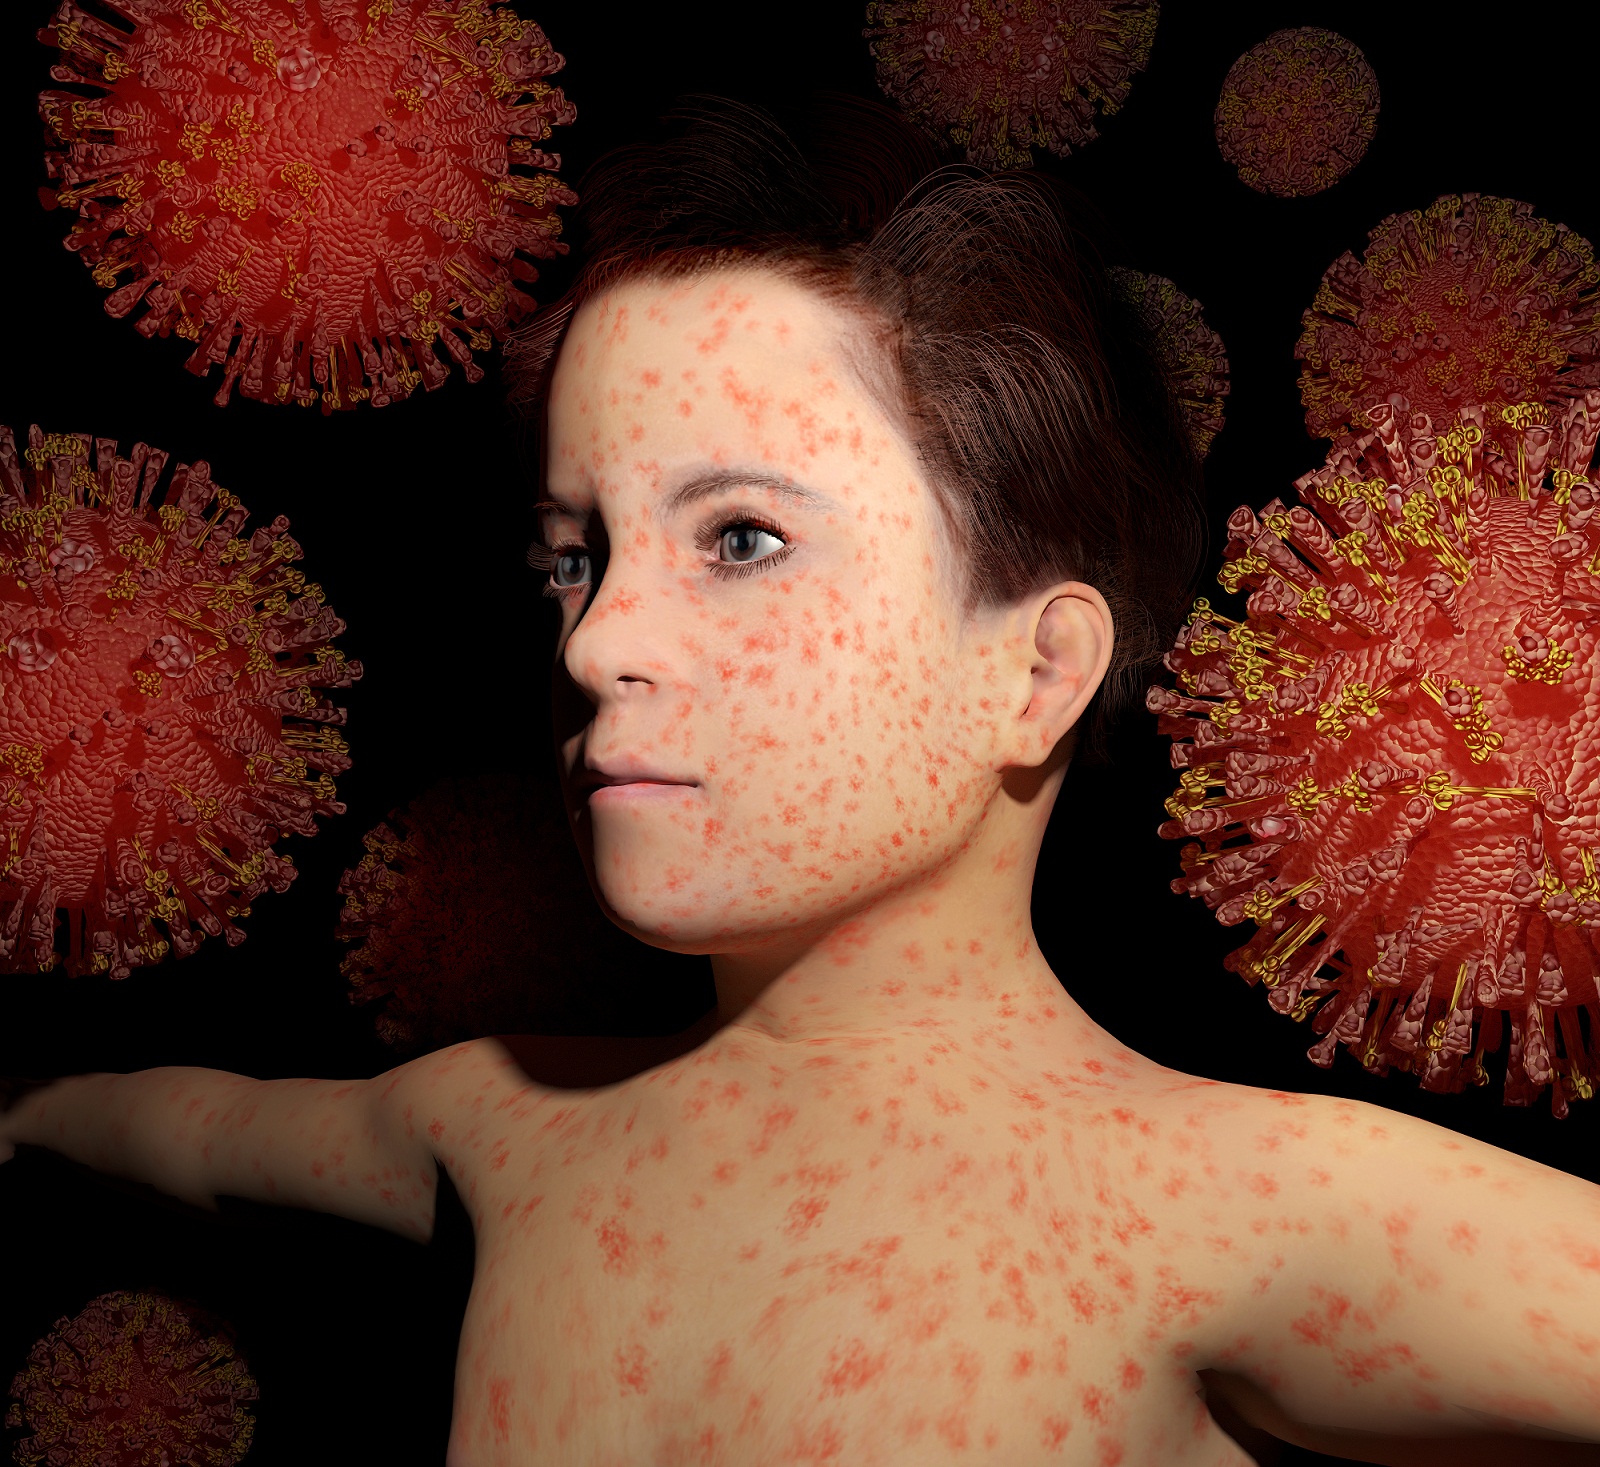 image of boy with measles